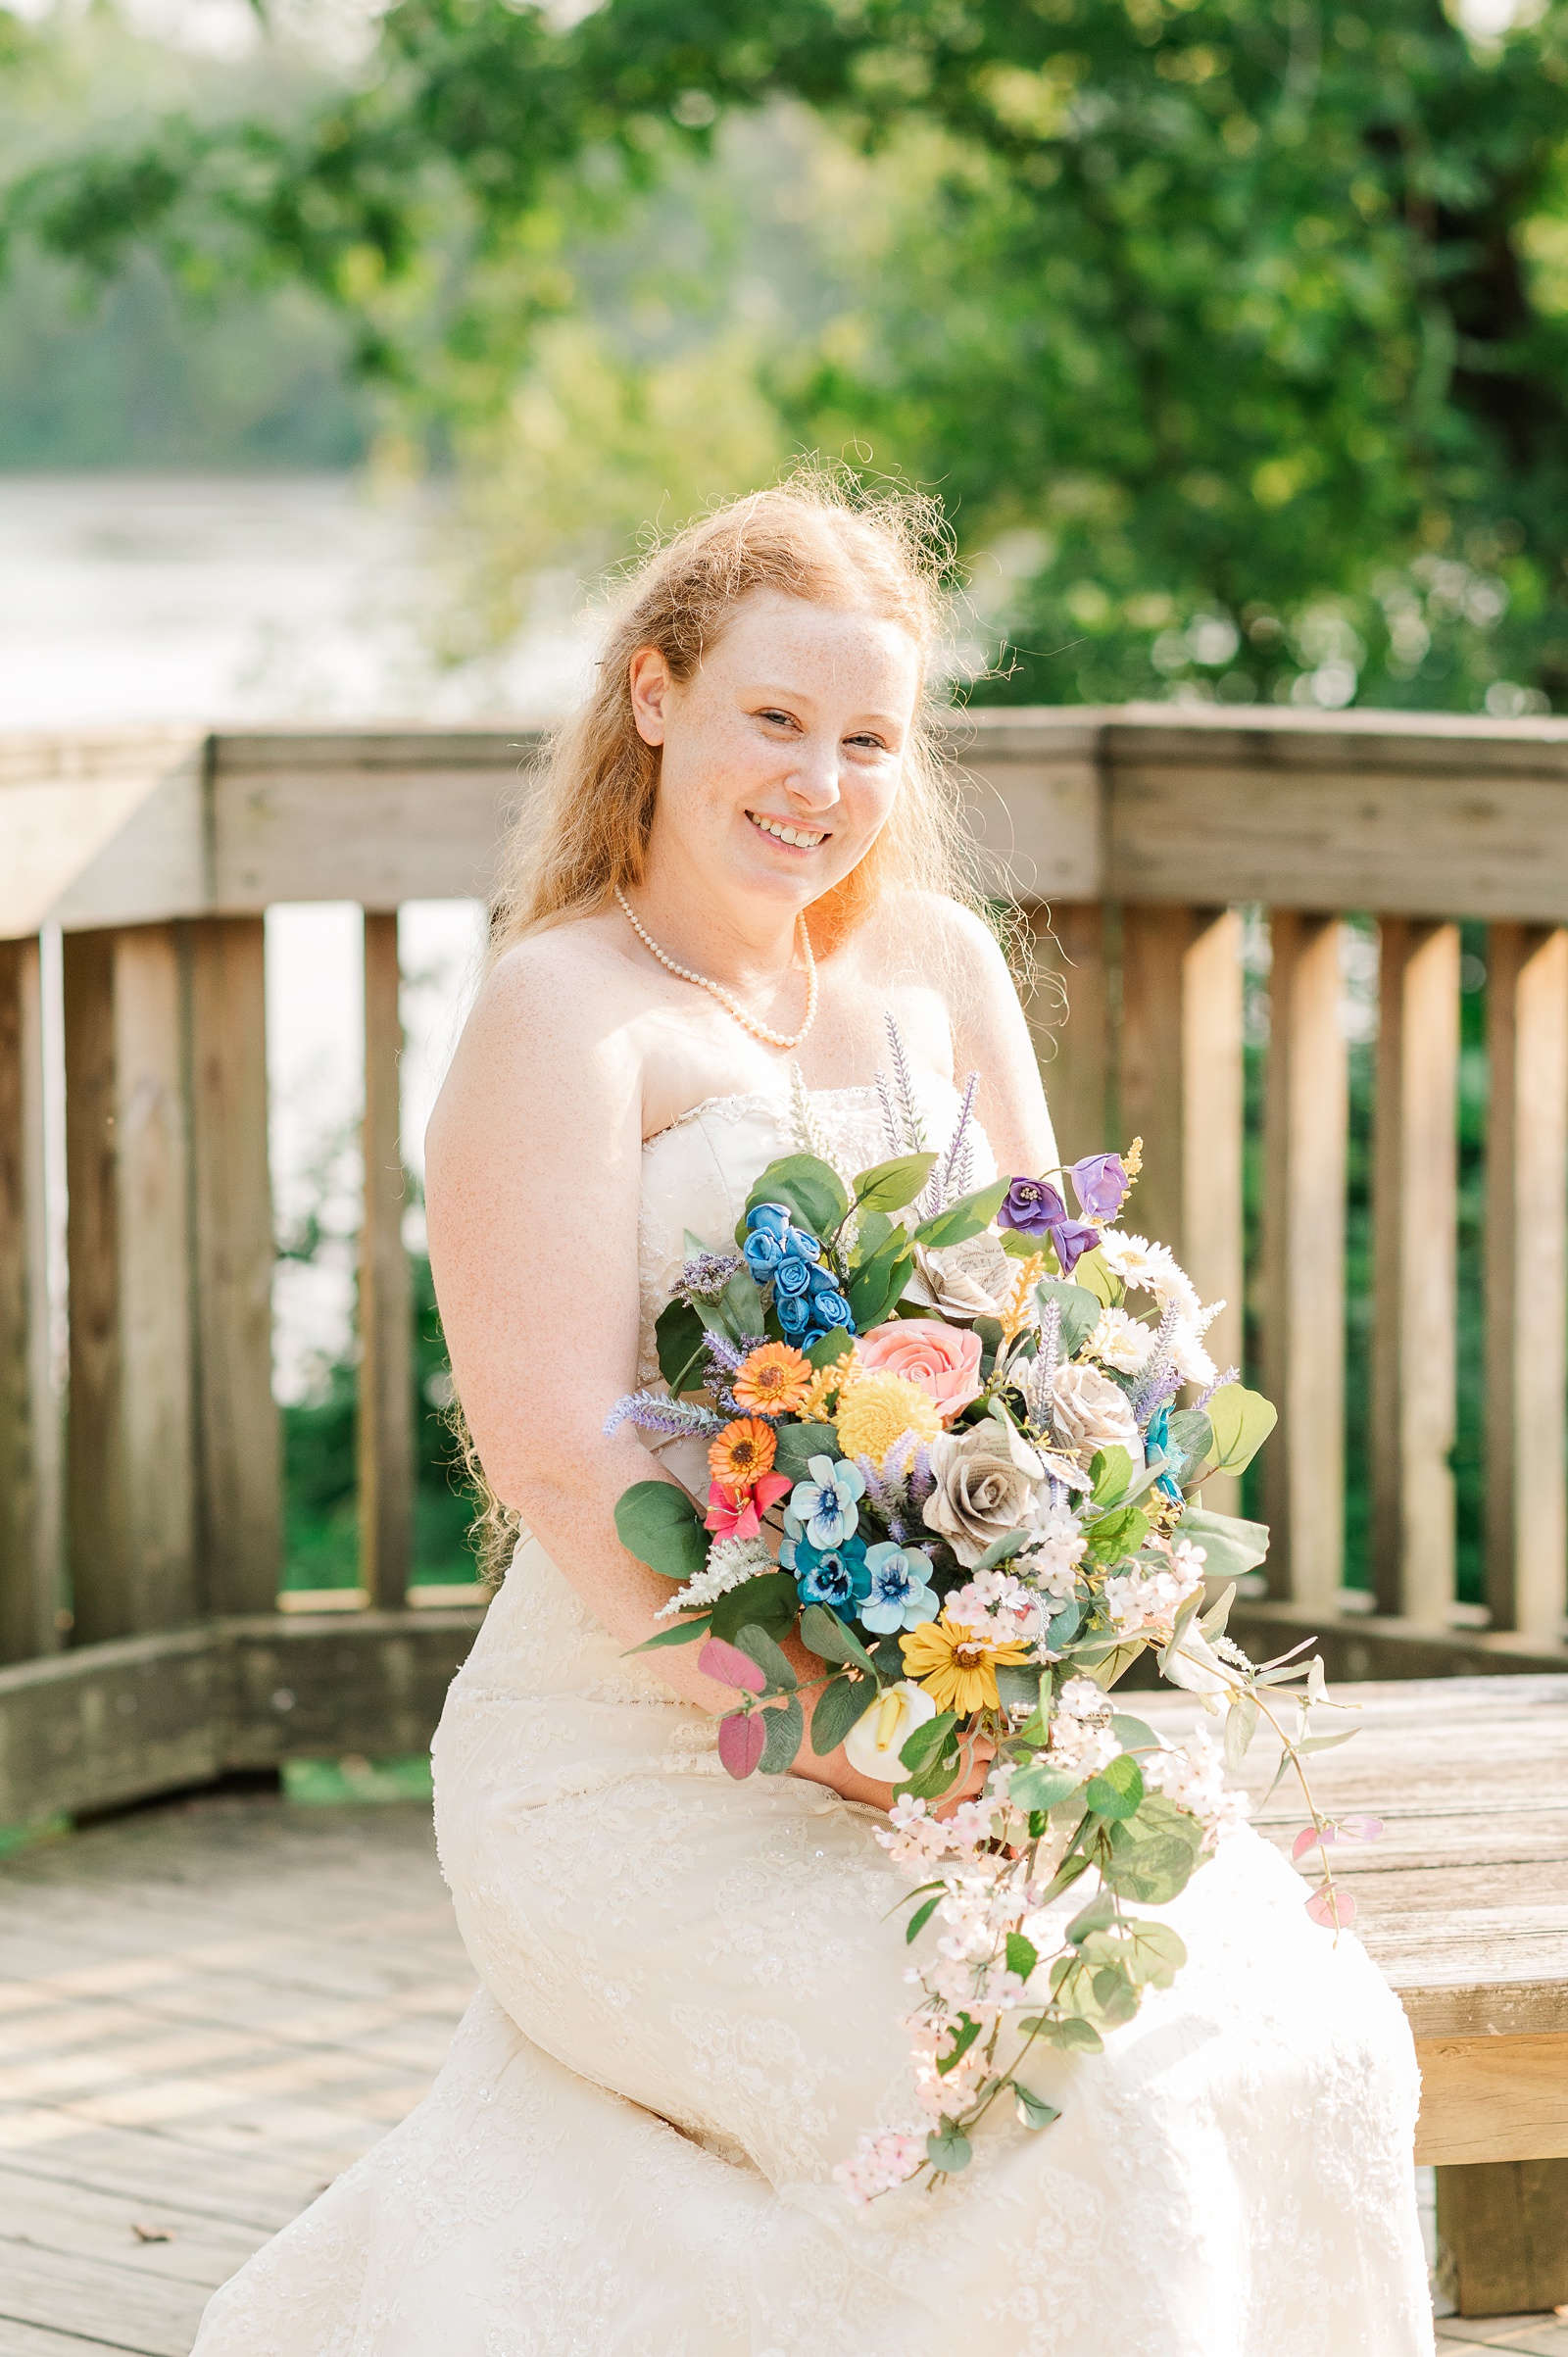 Bridal Details and Portraits During Fall Fairytale Inspire Intimate Ceremony at Osbourne Park in Richmond. Photography by Richmond Wedding Photographer Kailey Brianne Photography. 